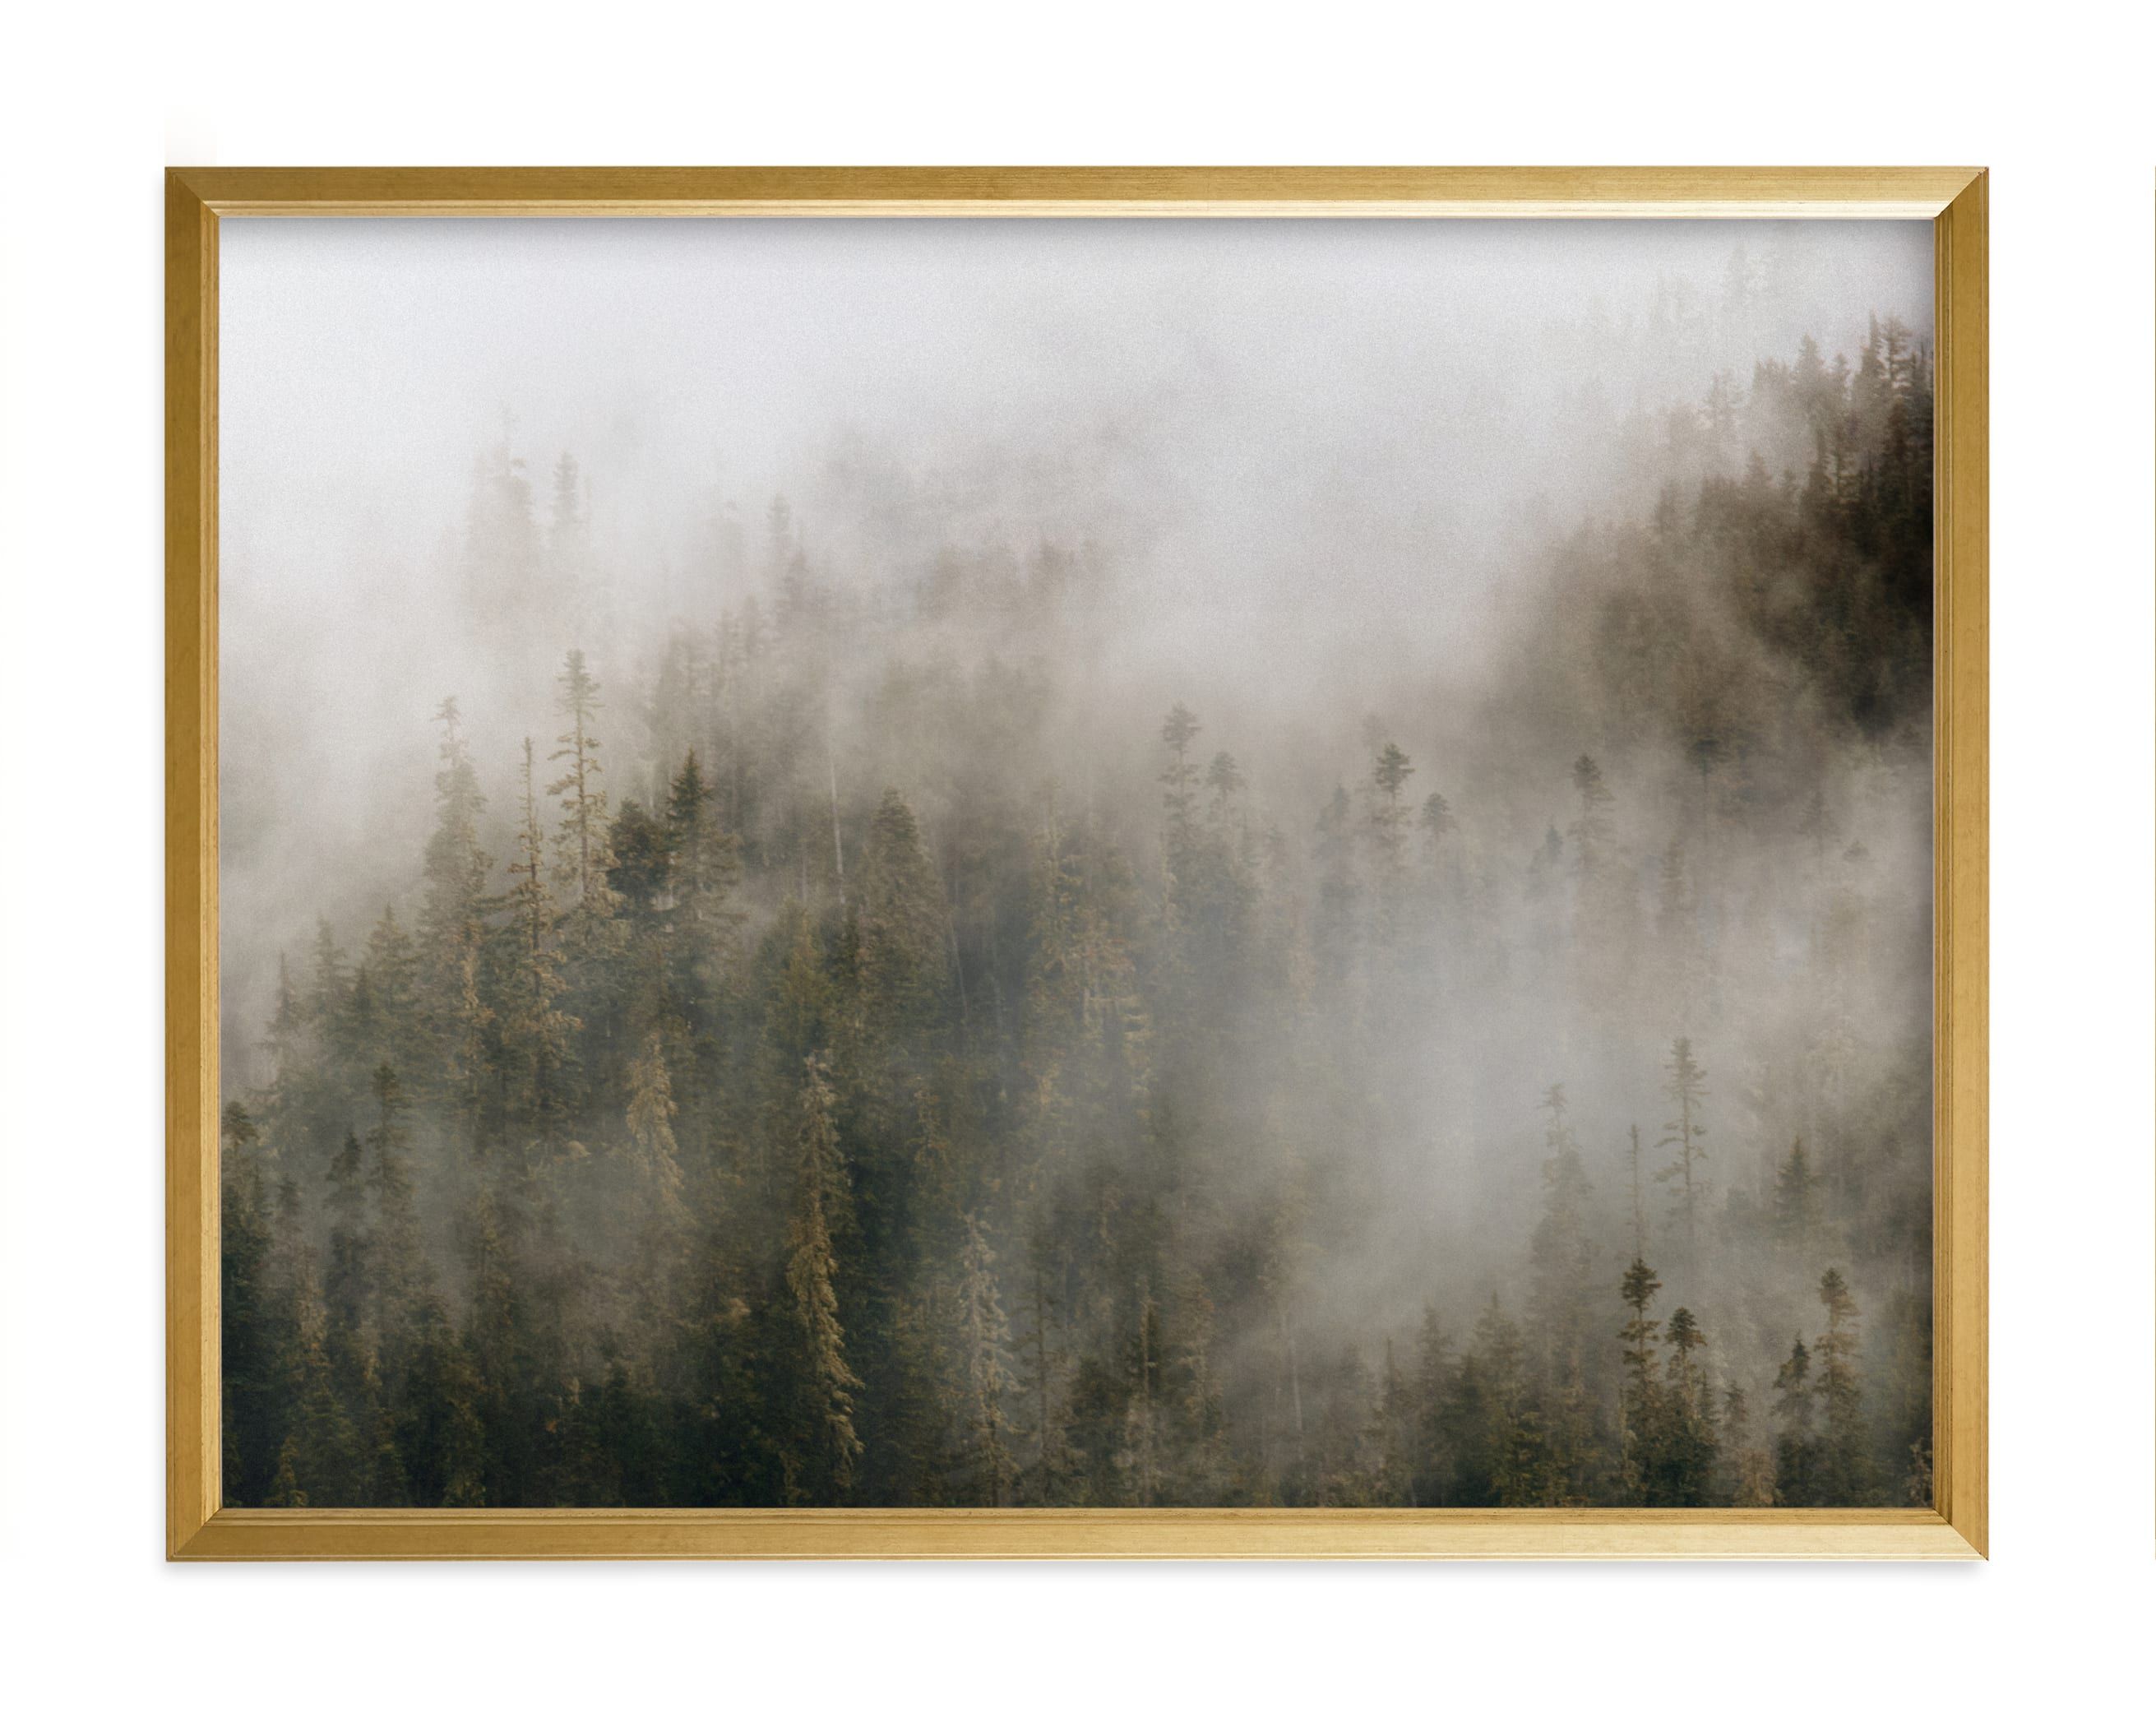 "Pacific North Fog" - Photography Limited Edition Art Print by Pockets of Film. | Minted